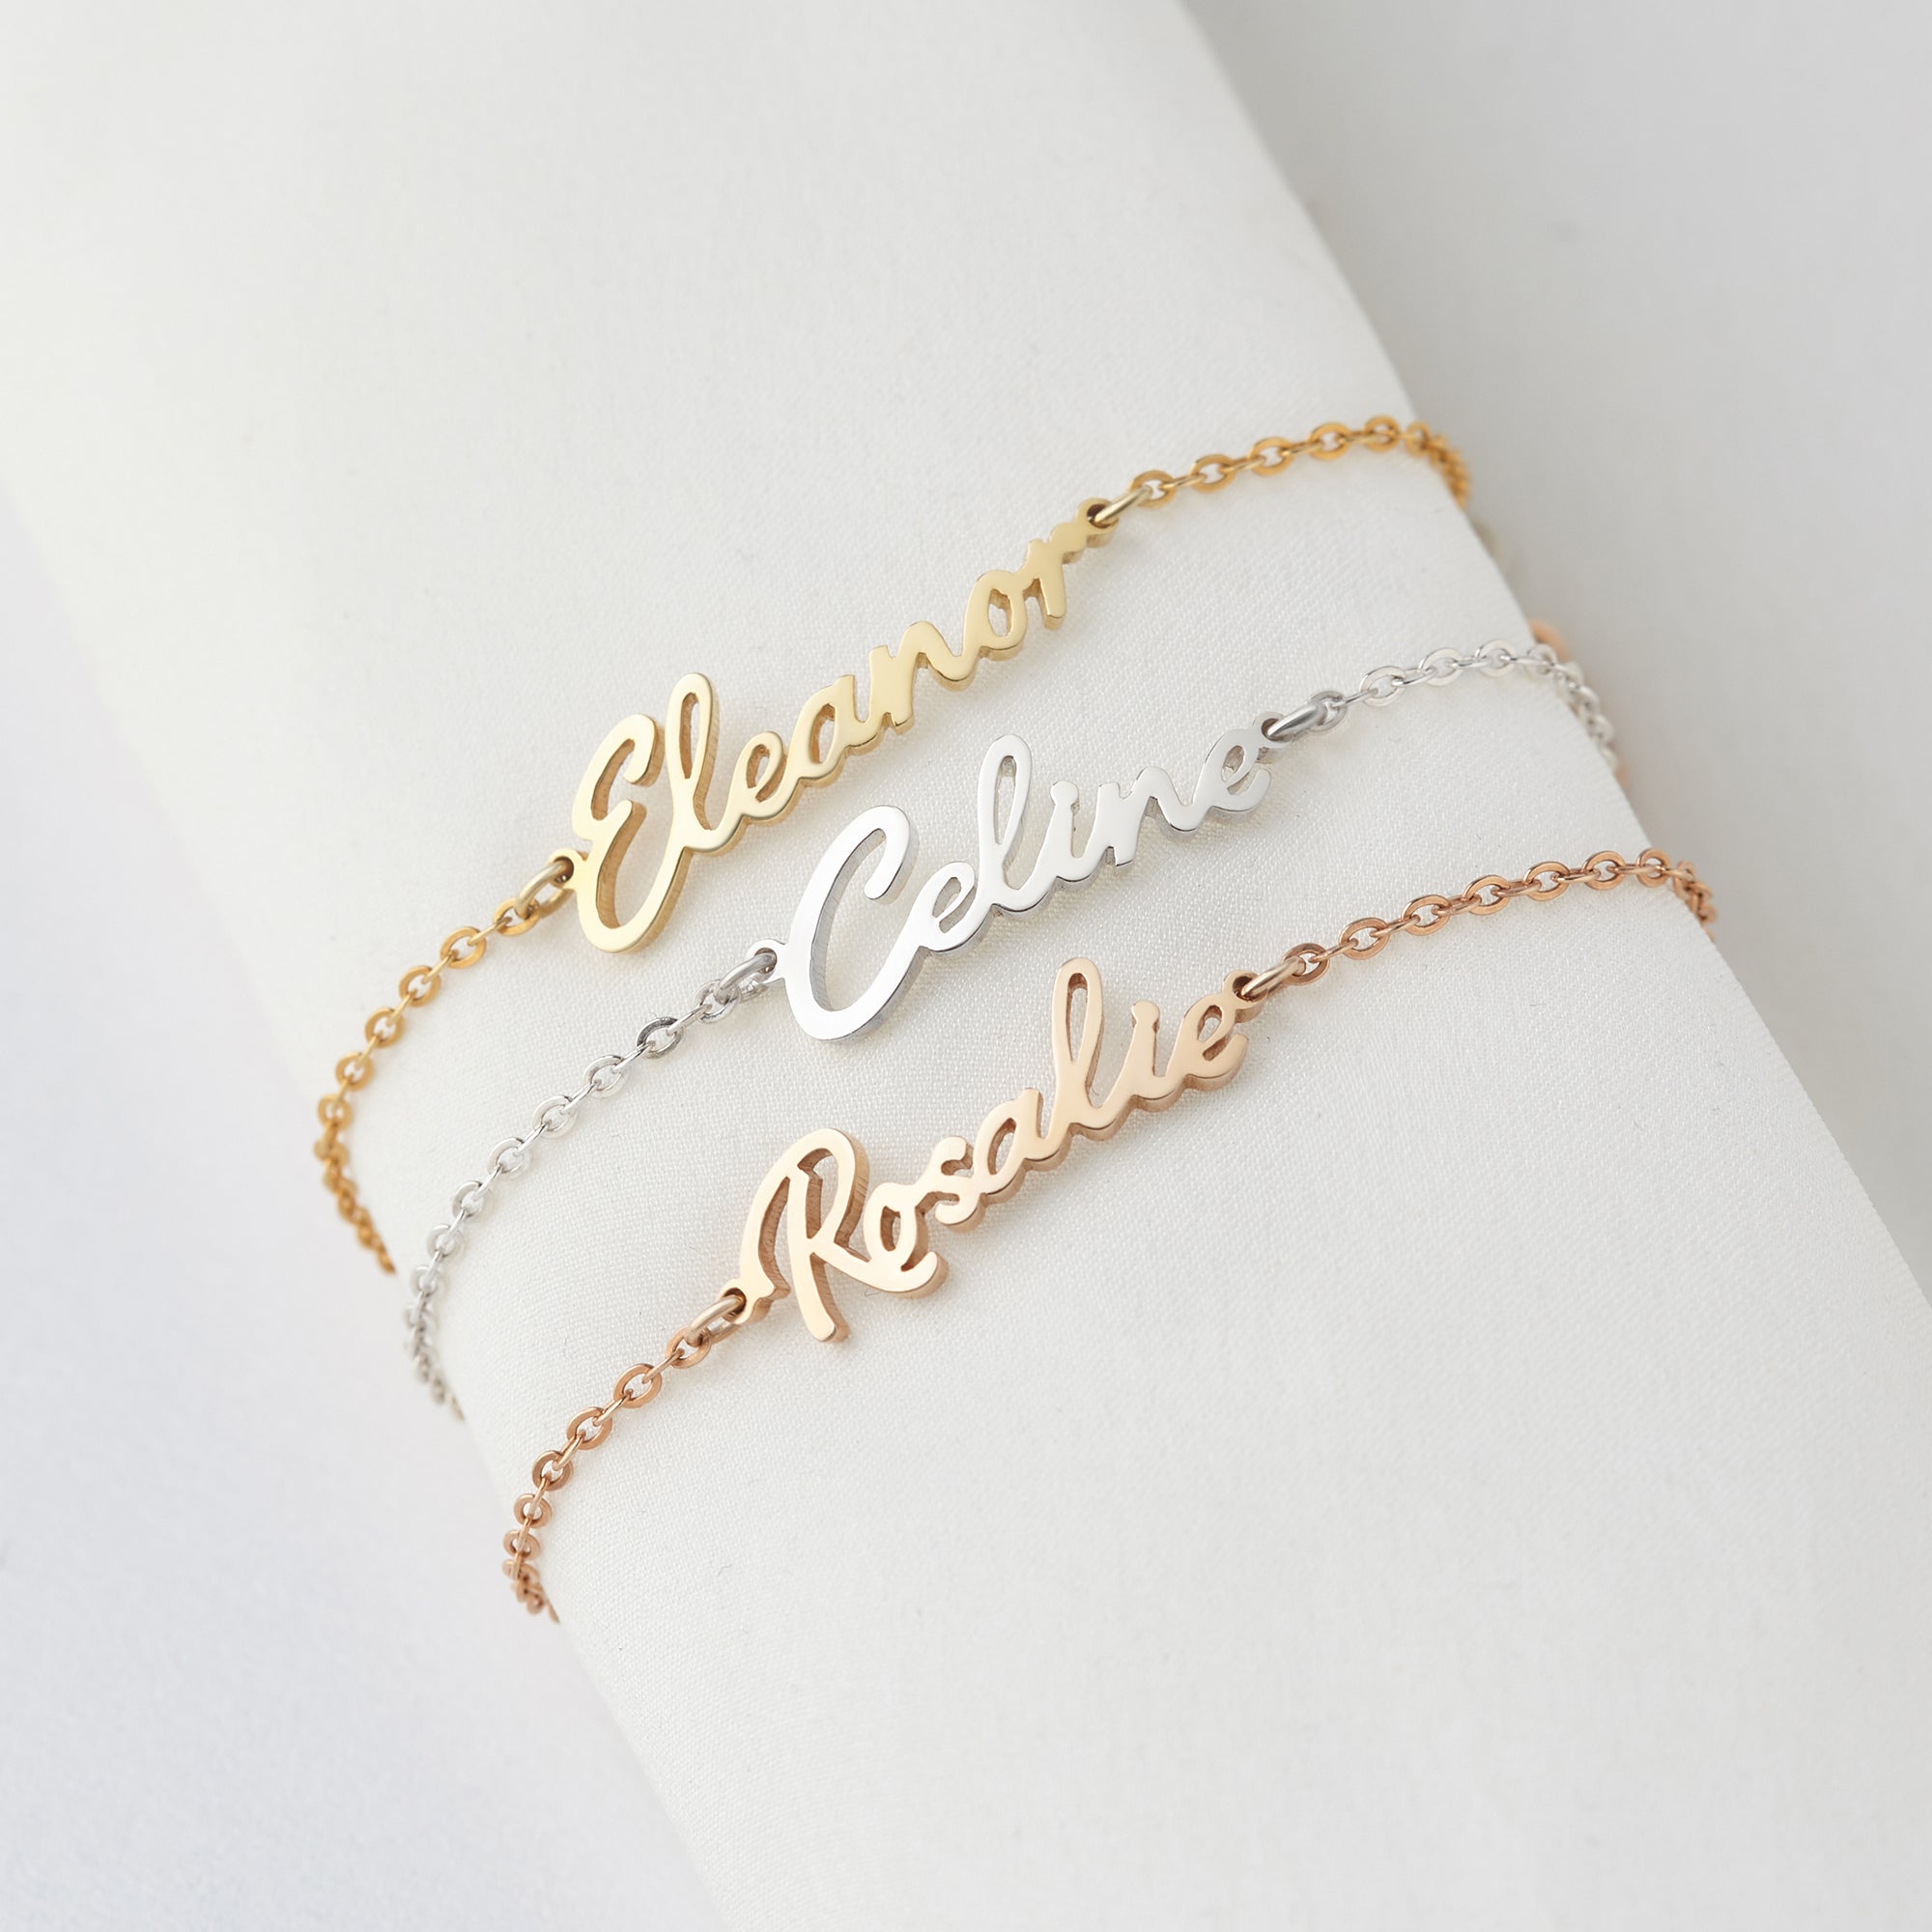 Personalized Cursive Name Bracelet in Sterling Silver with 18K Gold Plate - Birthday Gift for Her - Bracelets - Bijou Her -  -  - 